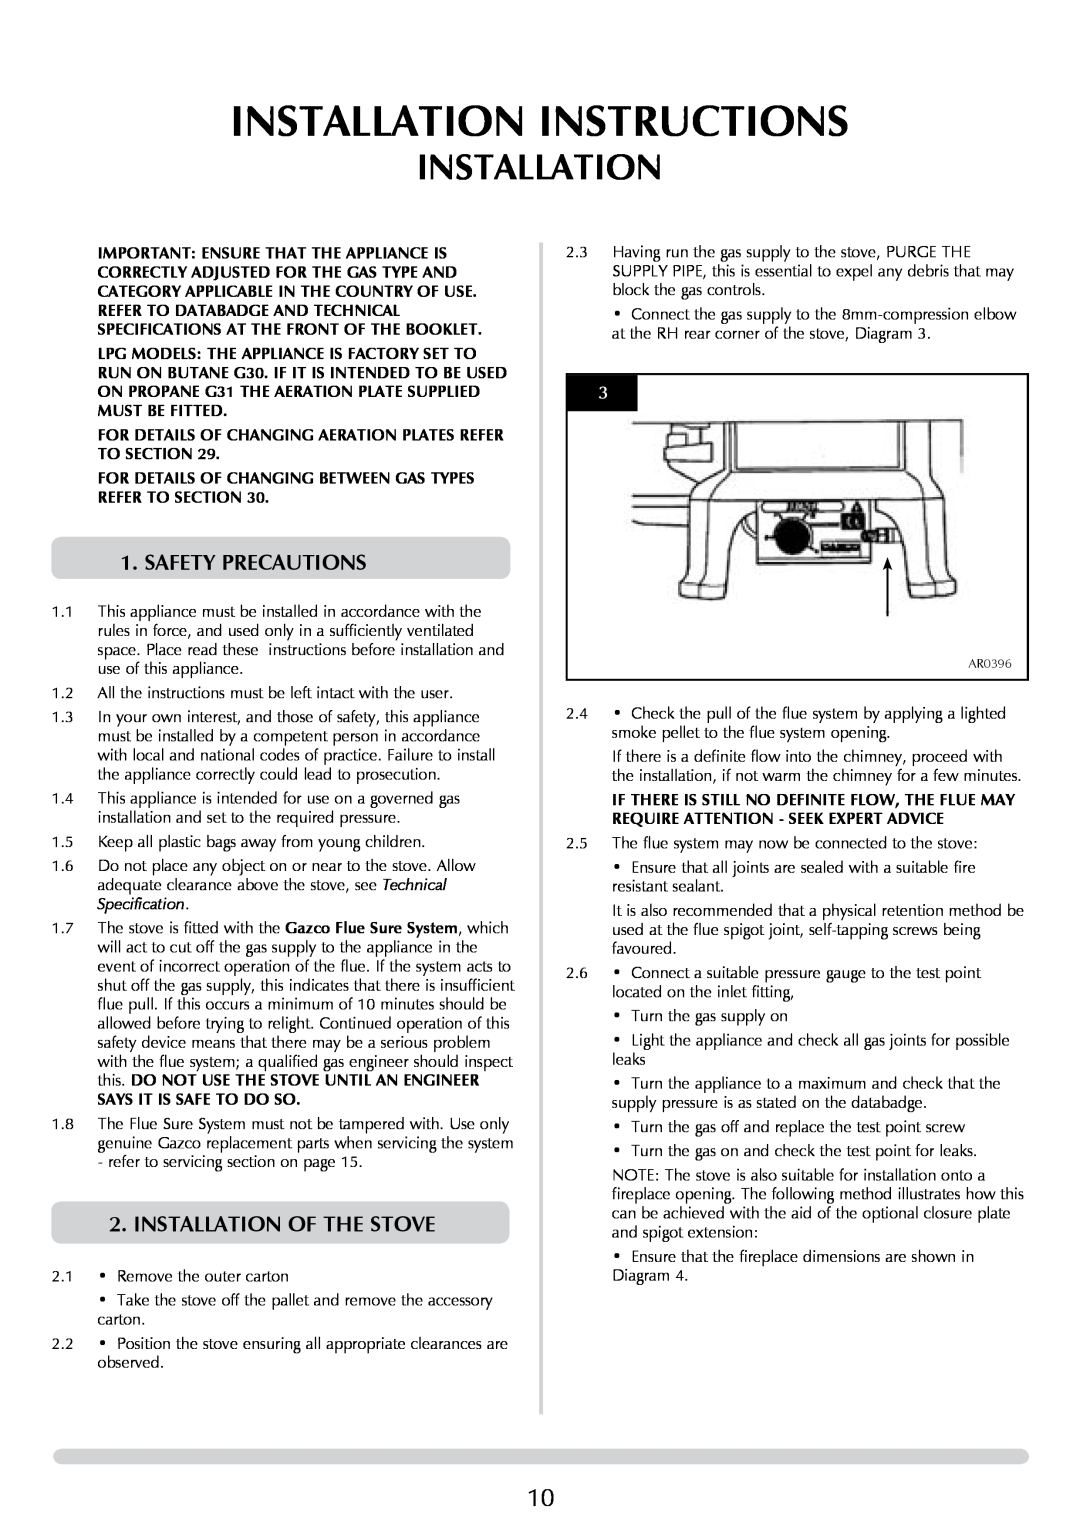 Stovax P8050 manual Installation Instructions, safety precautions, installation of the stove 